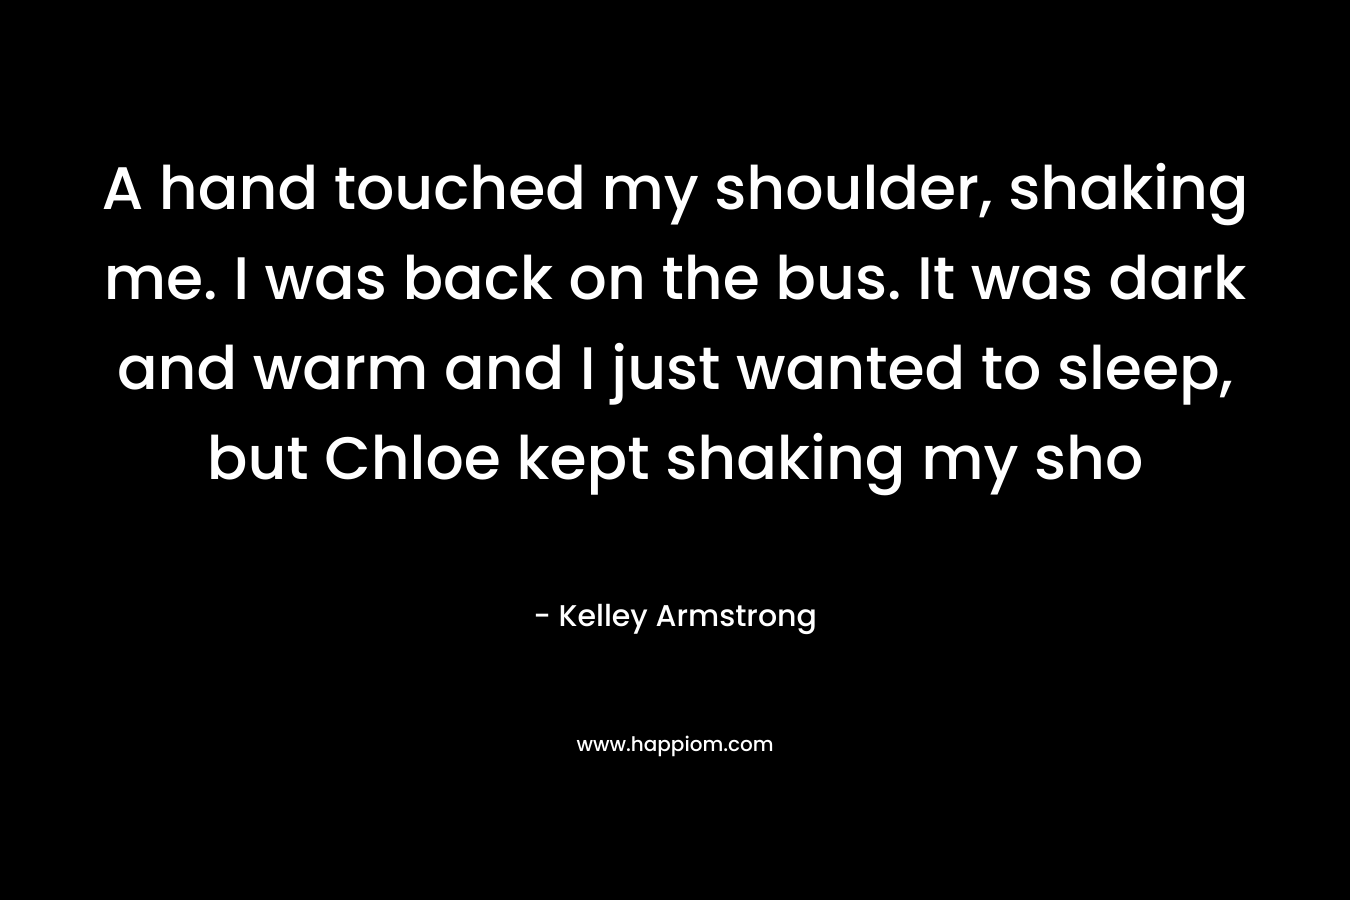 A hand touched my shoulder, shaking me. I was back on the bus. It was dark and warm and I just wanted to sleep, but Chloe kept shaking my sho – Kelley Armstrong